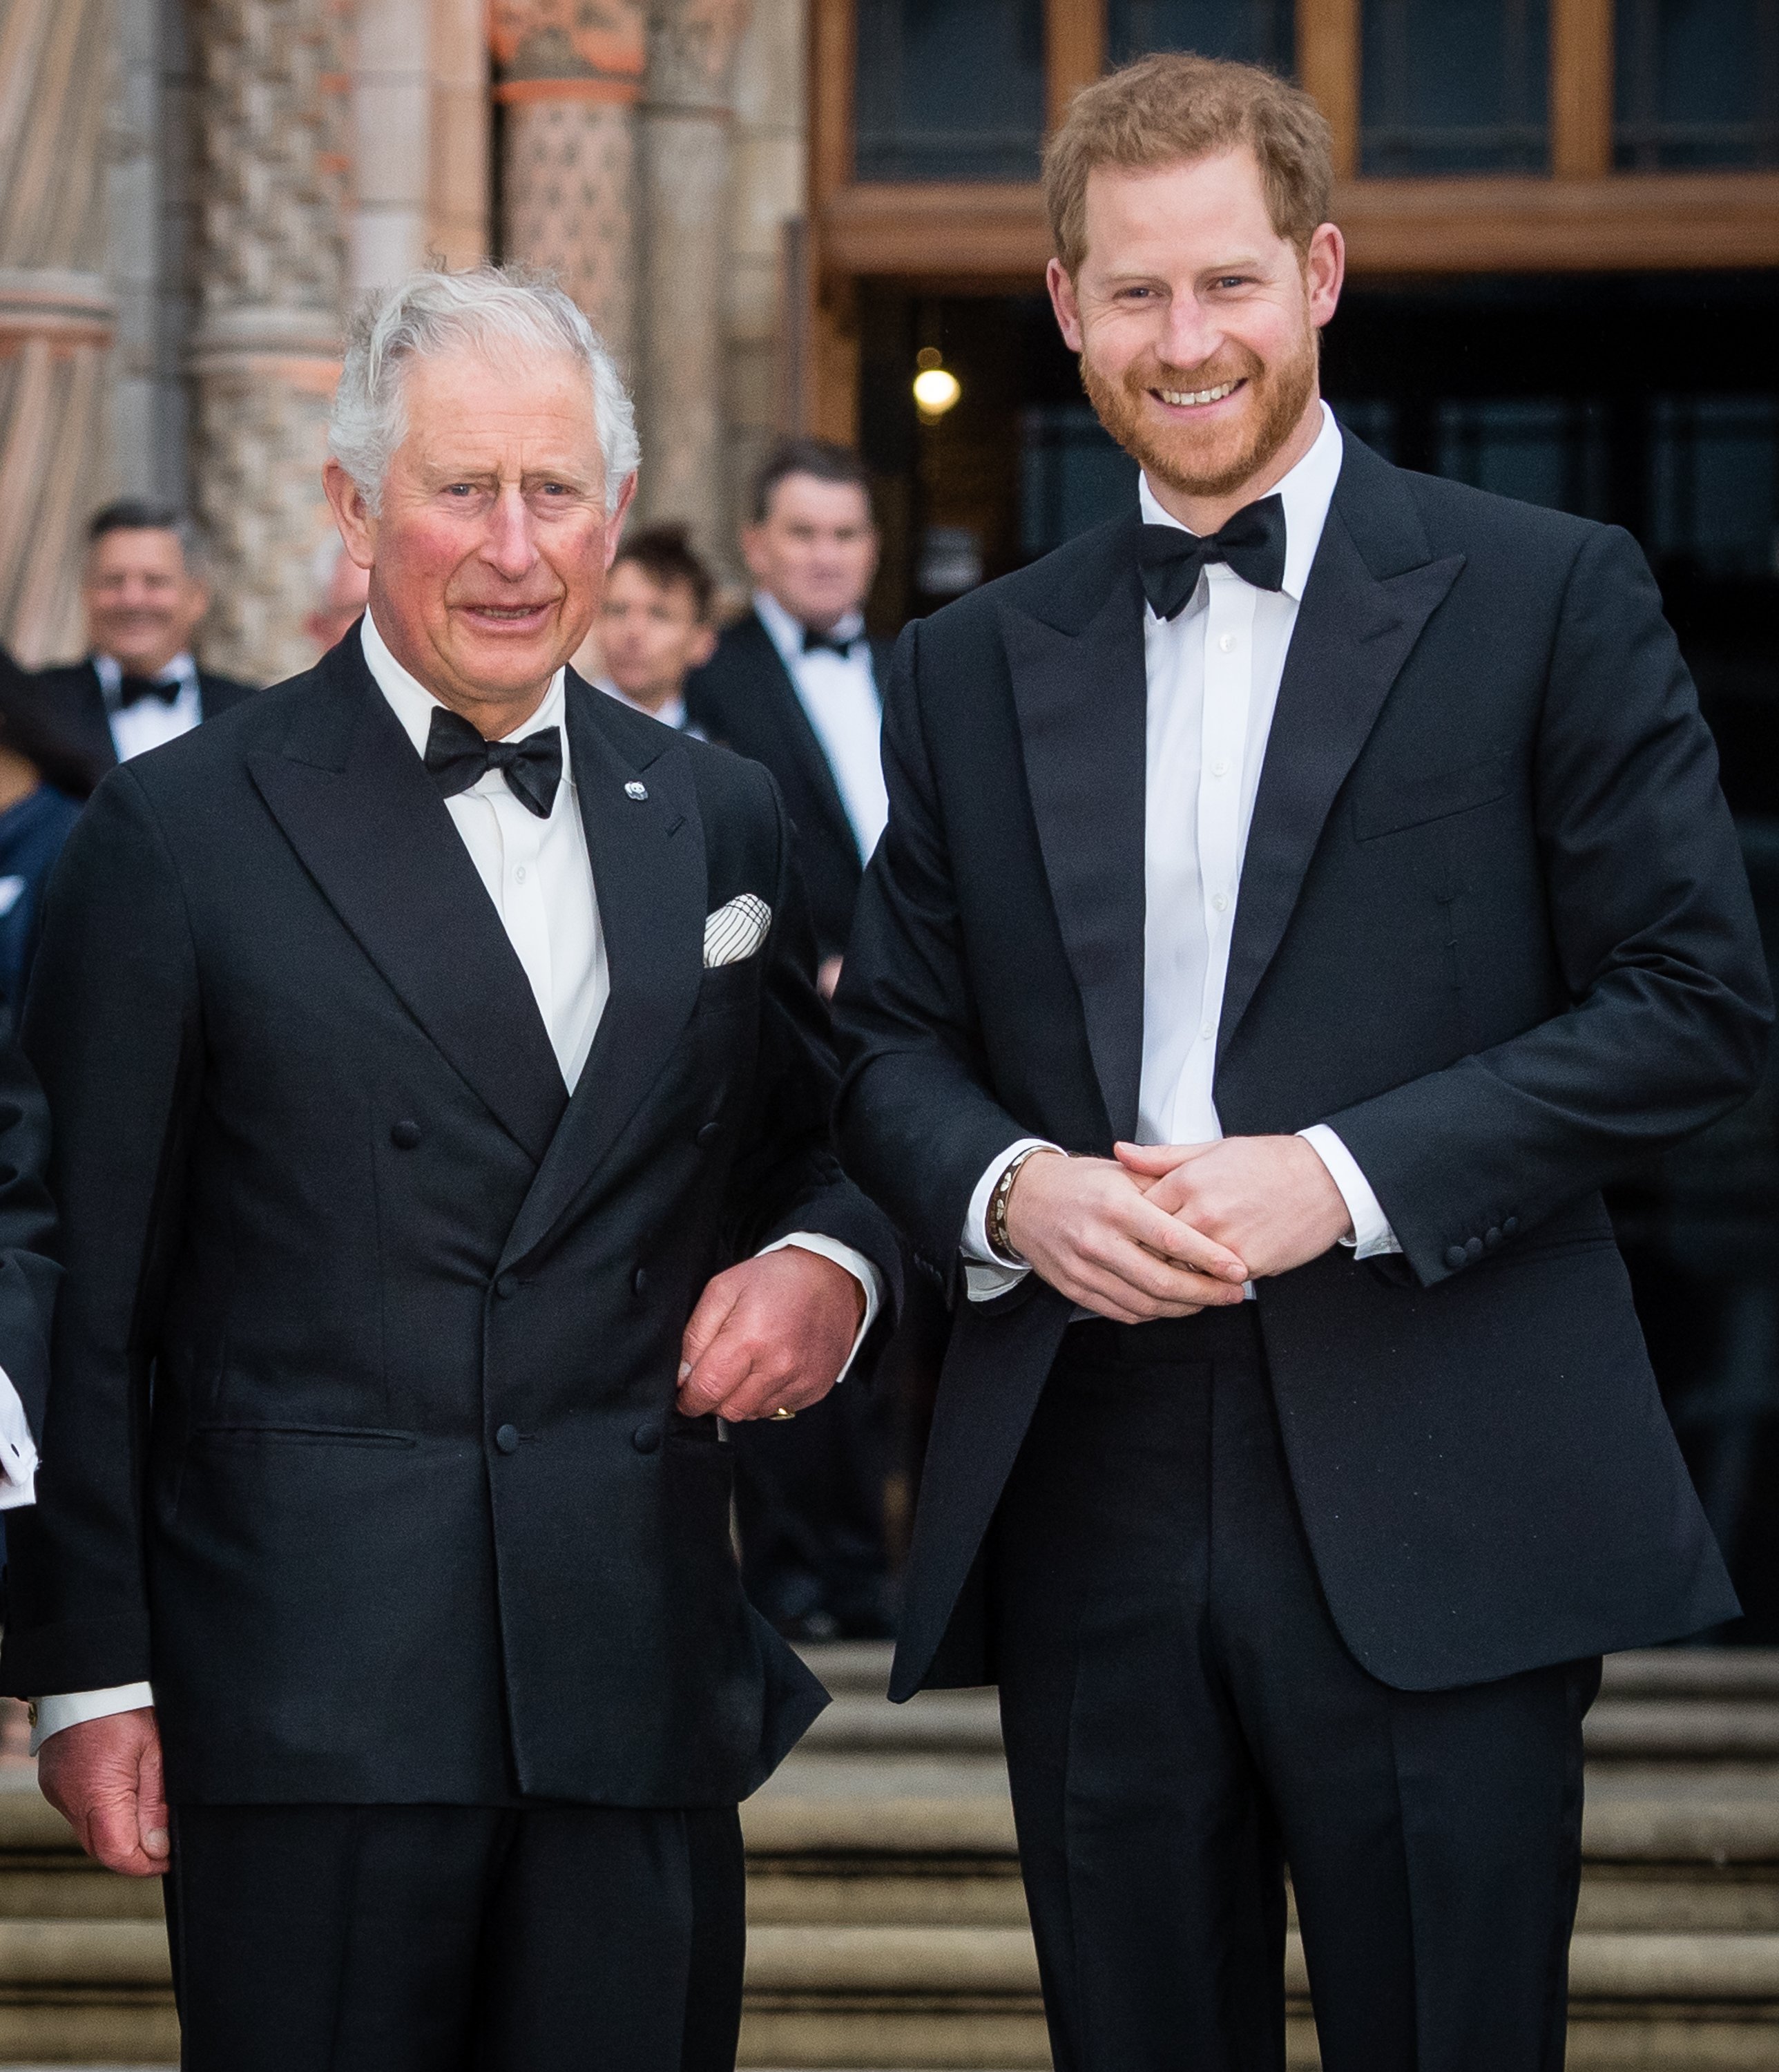 King Charles III and Prince Harry, Duke of Sussex, attend the "Our Planet" global premiere at Natural History Museum on April 04, 2019, in London, England. | Source: Getty Images